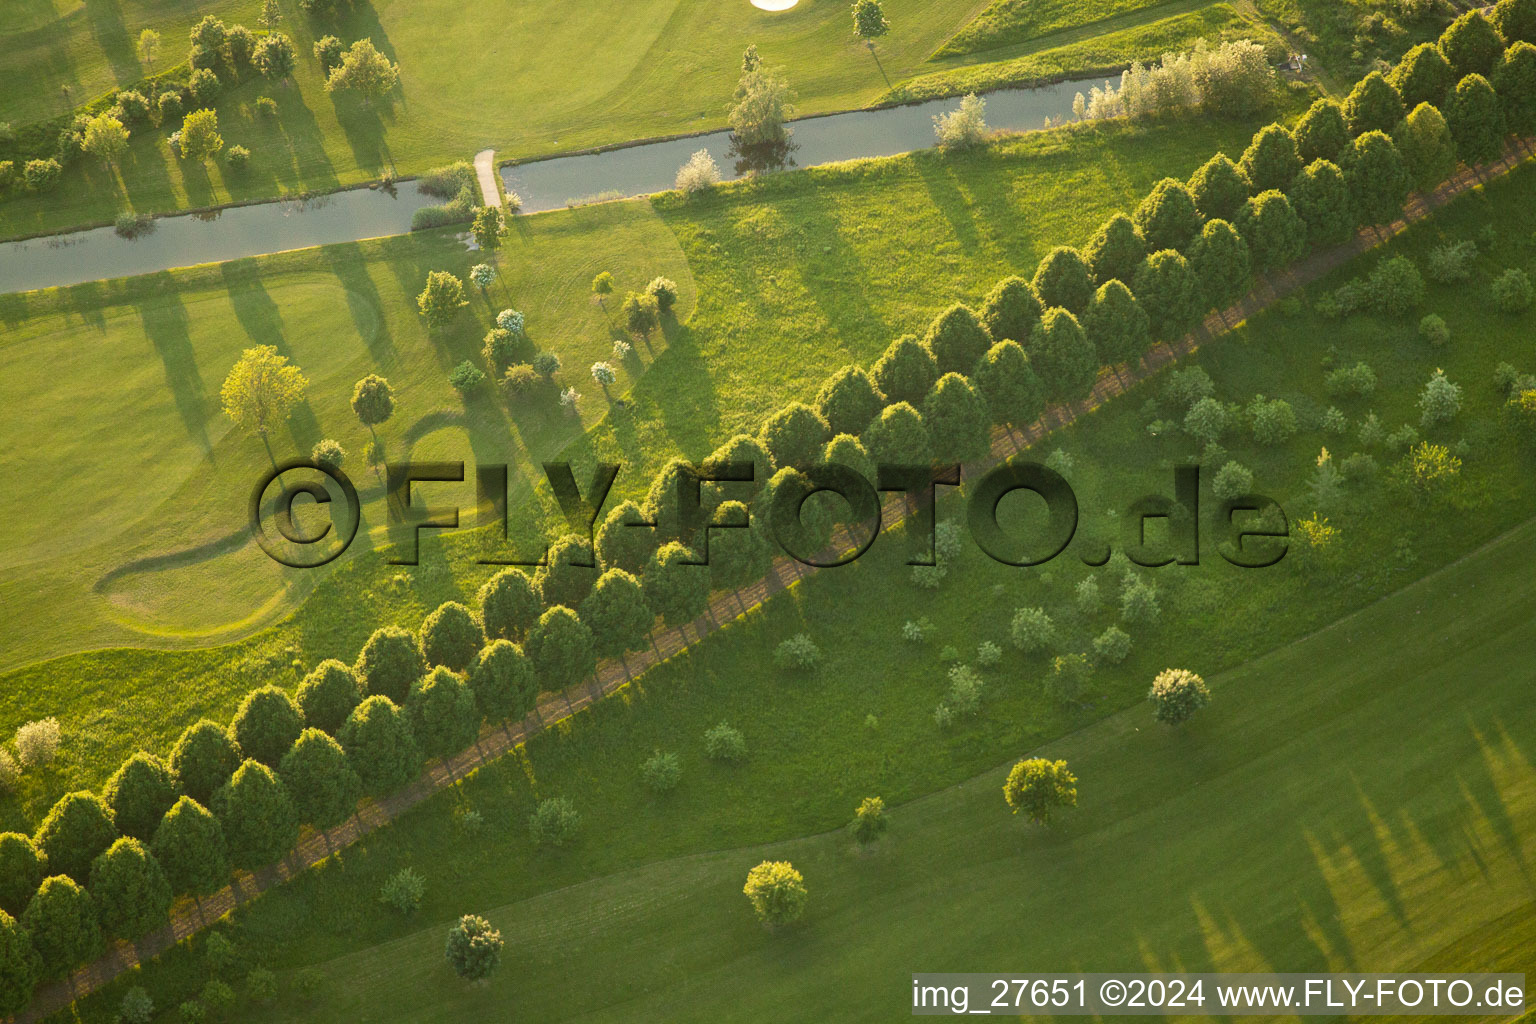 Aerial view of Grounds of the Golf course at Golfclub Hofgut Scheibenhardt e.V in Karlsruhe in the state Baden-Wurttemberg